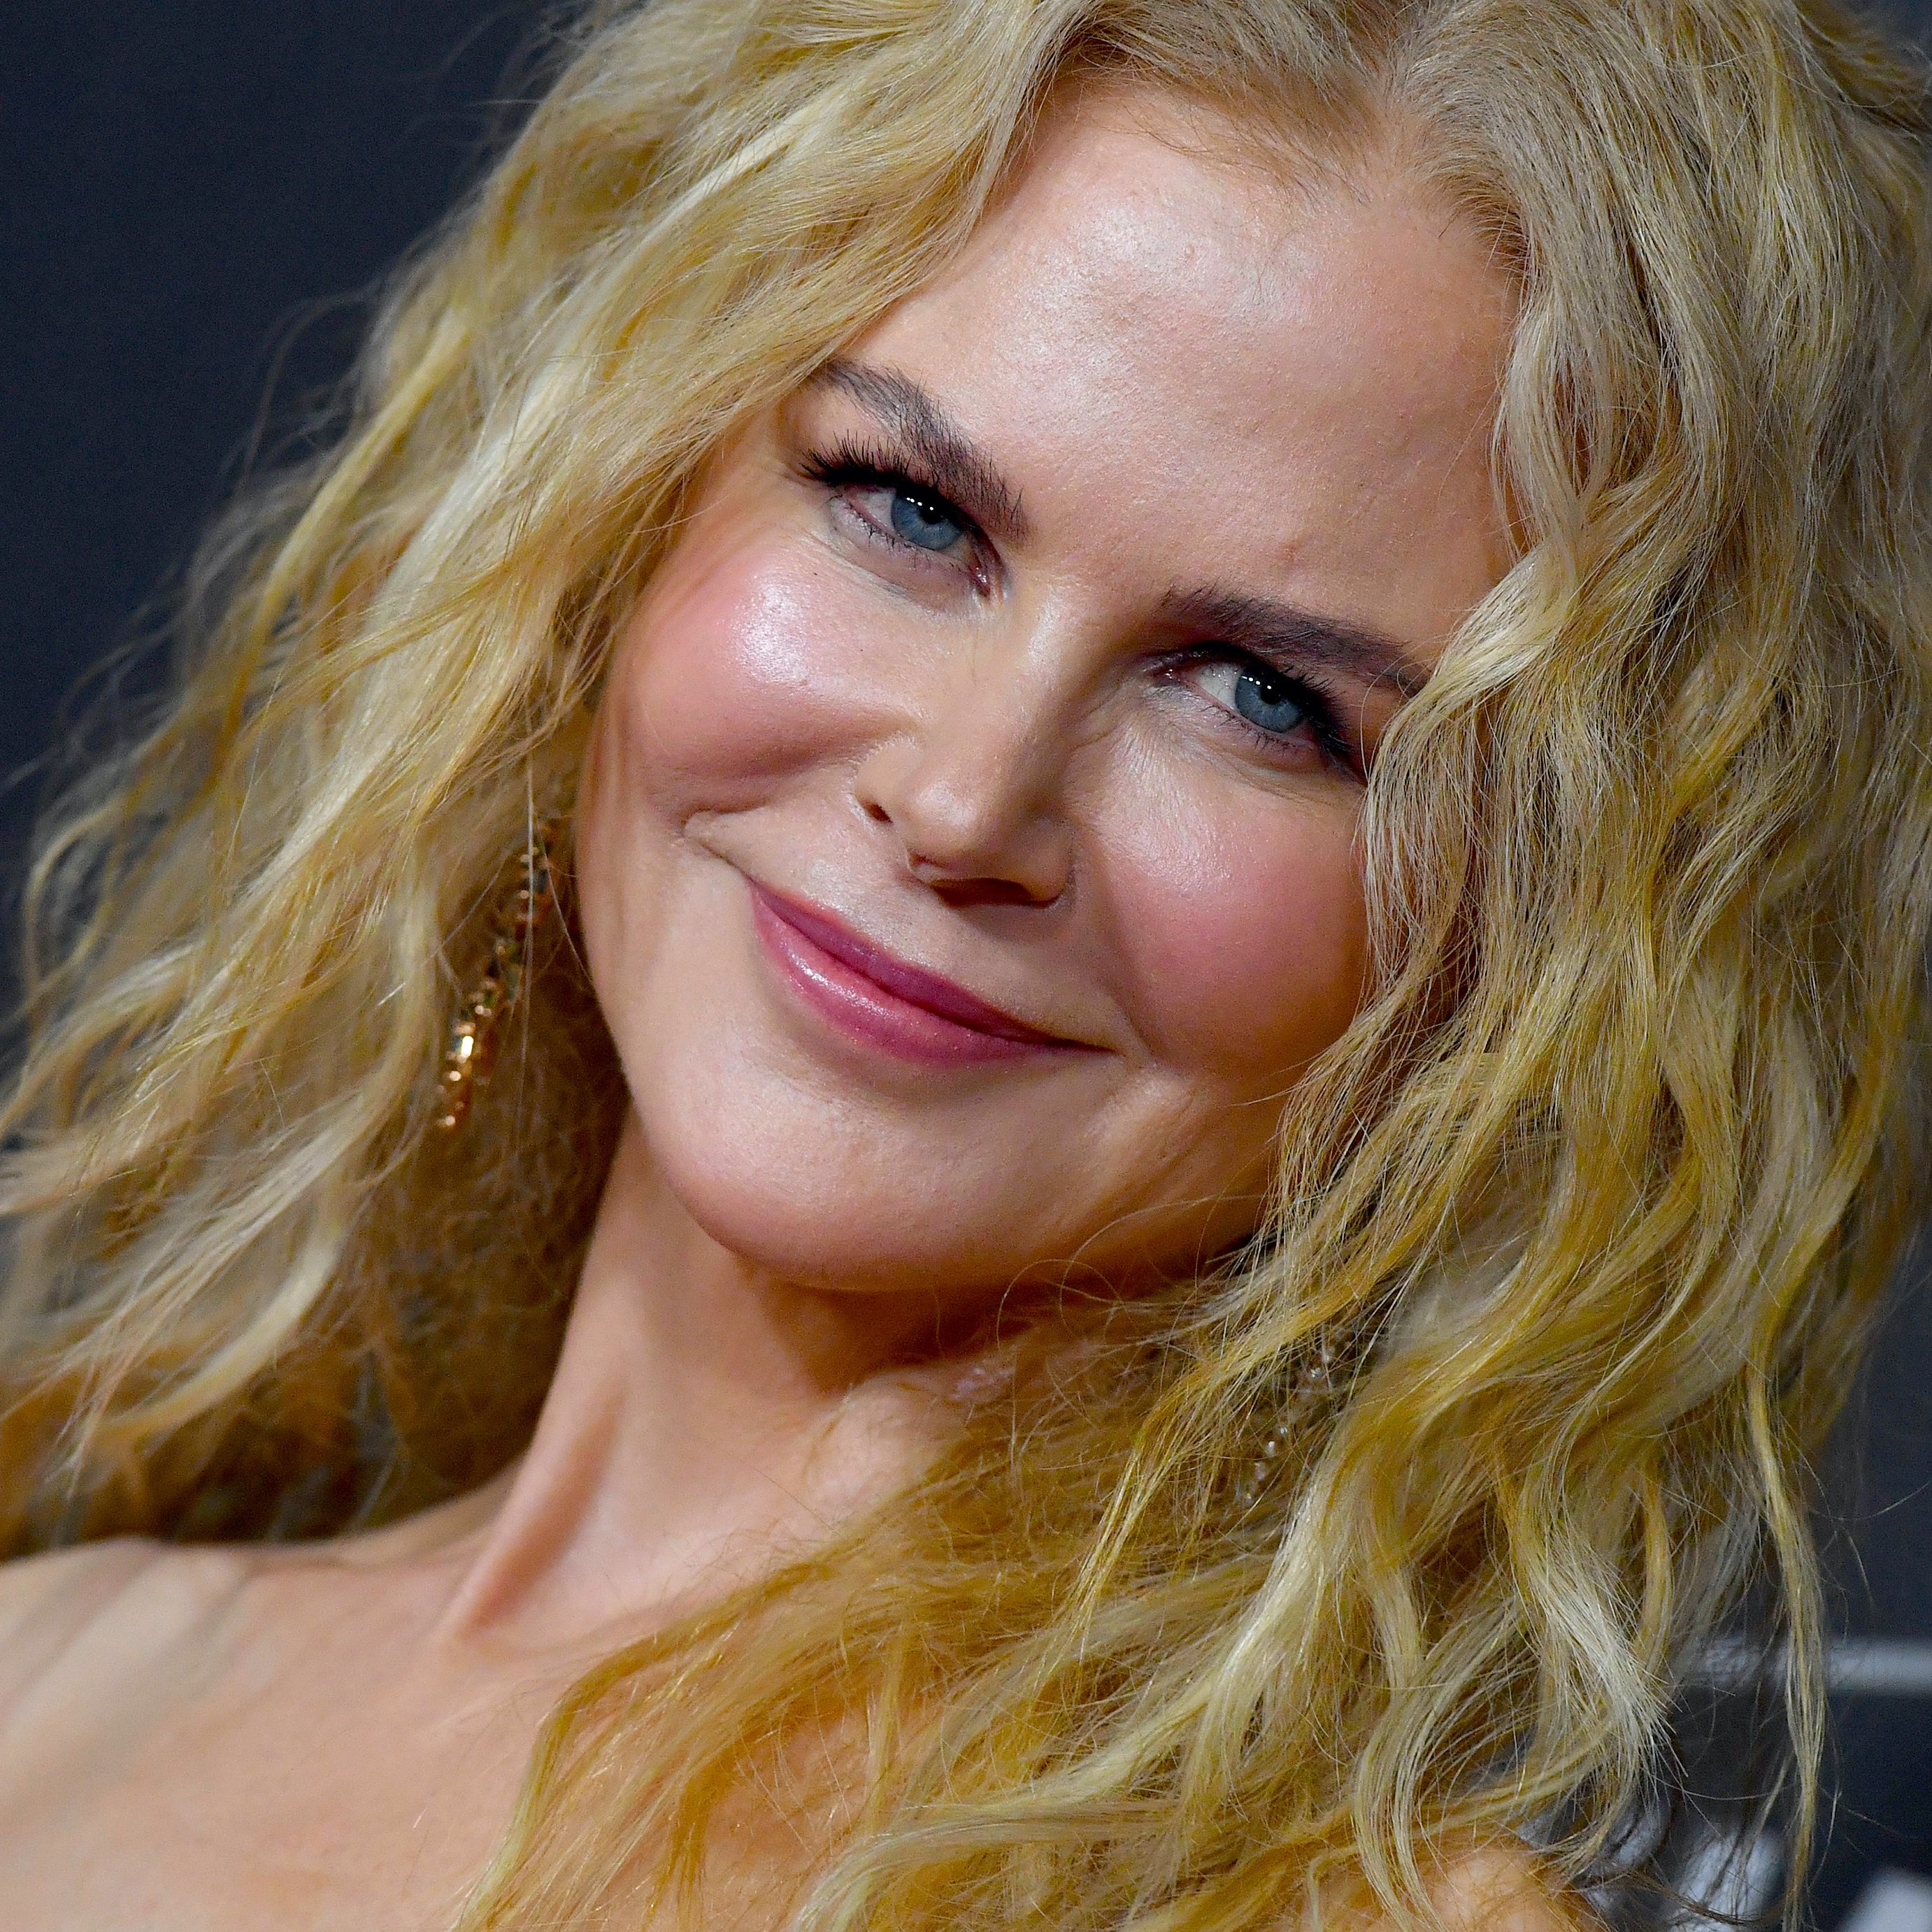 Nicole Kidman Wore the Sexiest Cutout Dress and Fans Are Picking Their Jaws Off the Floor